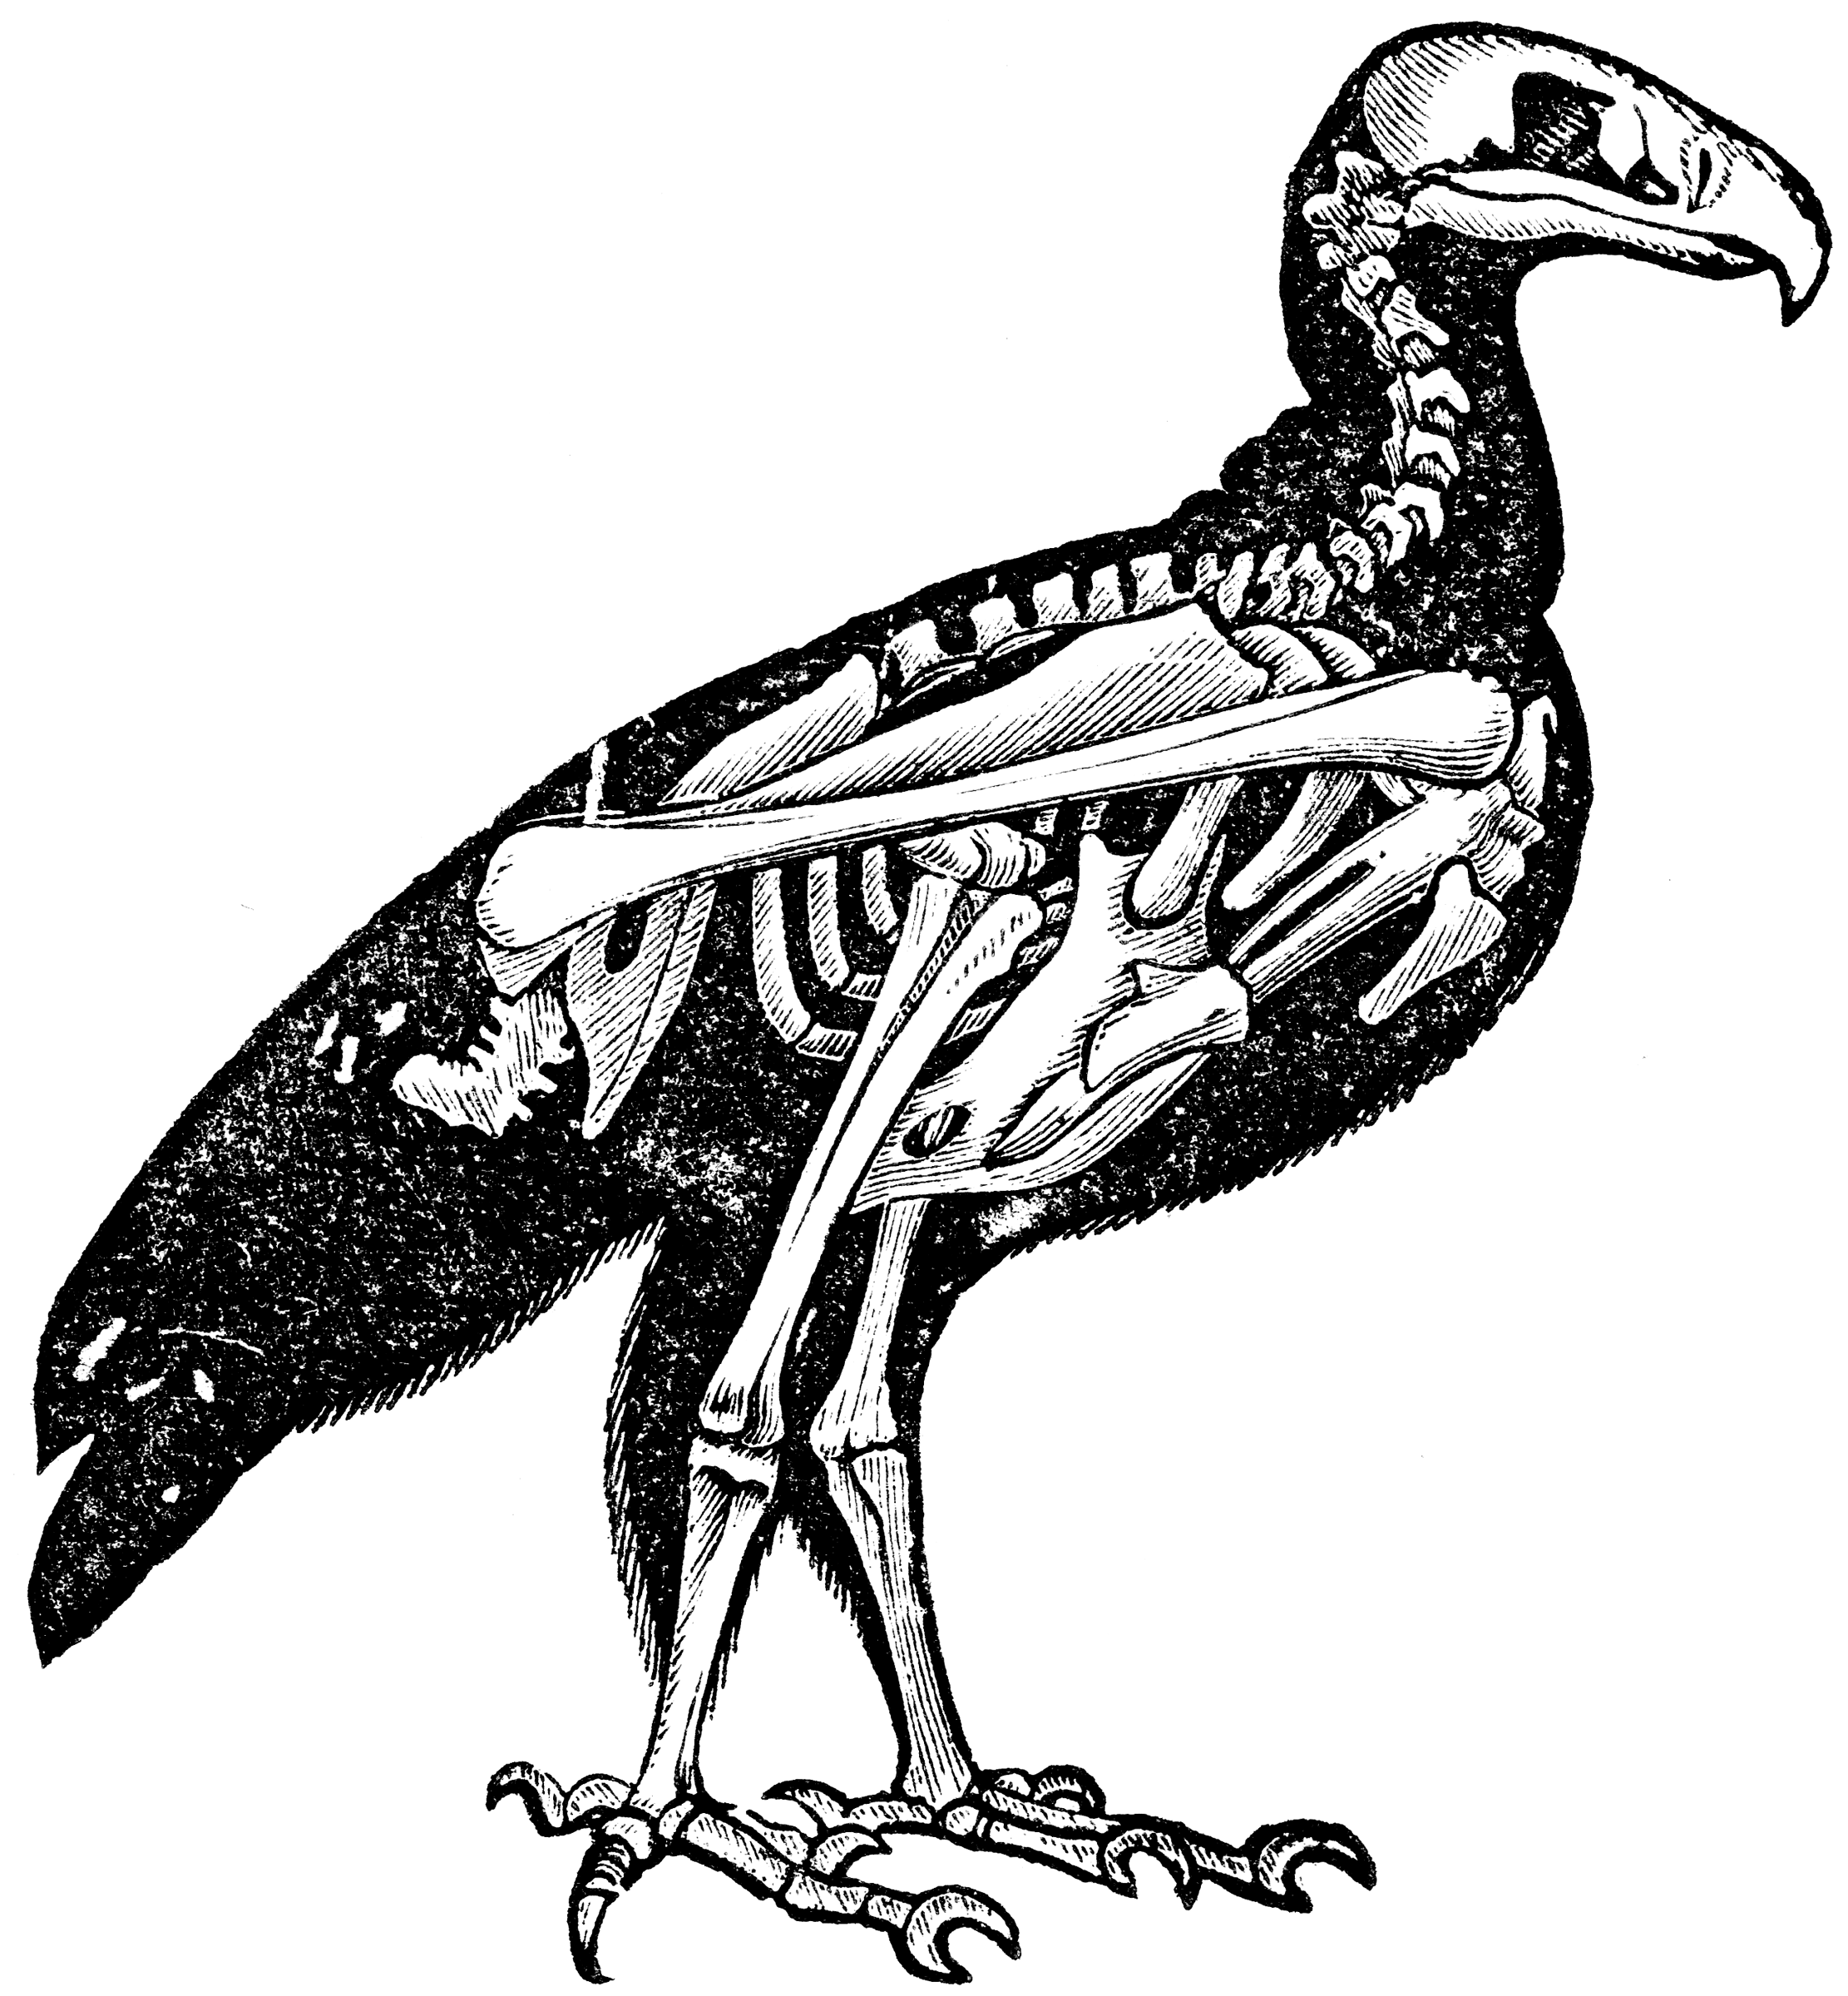 The Skeleton of a Bird | ClipArt ETC